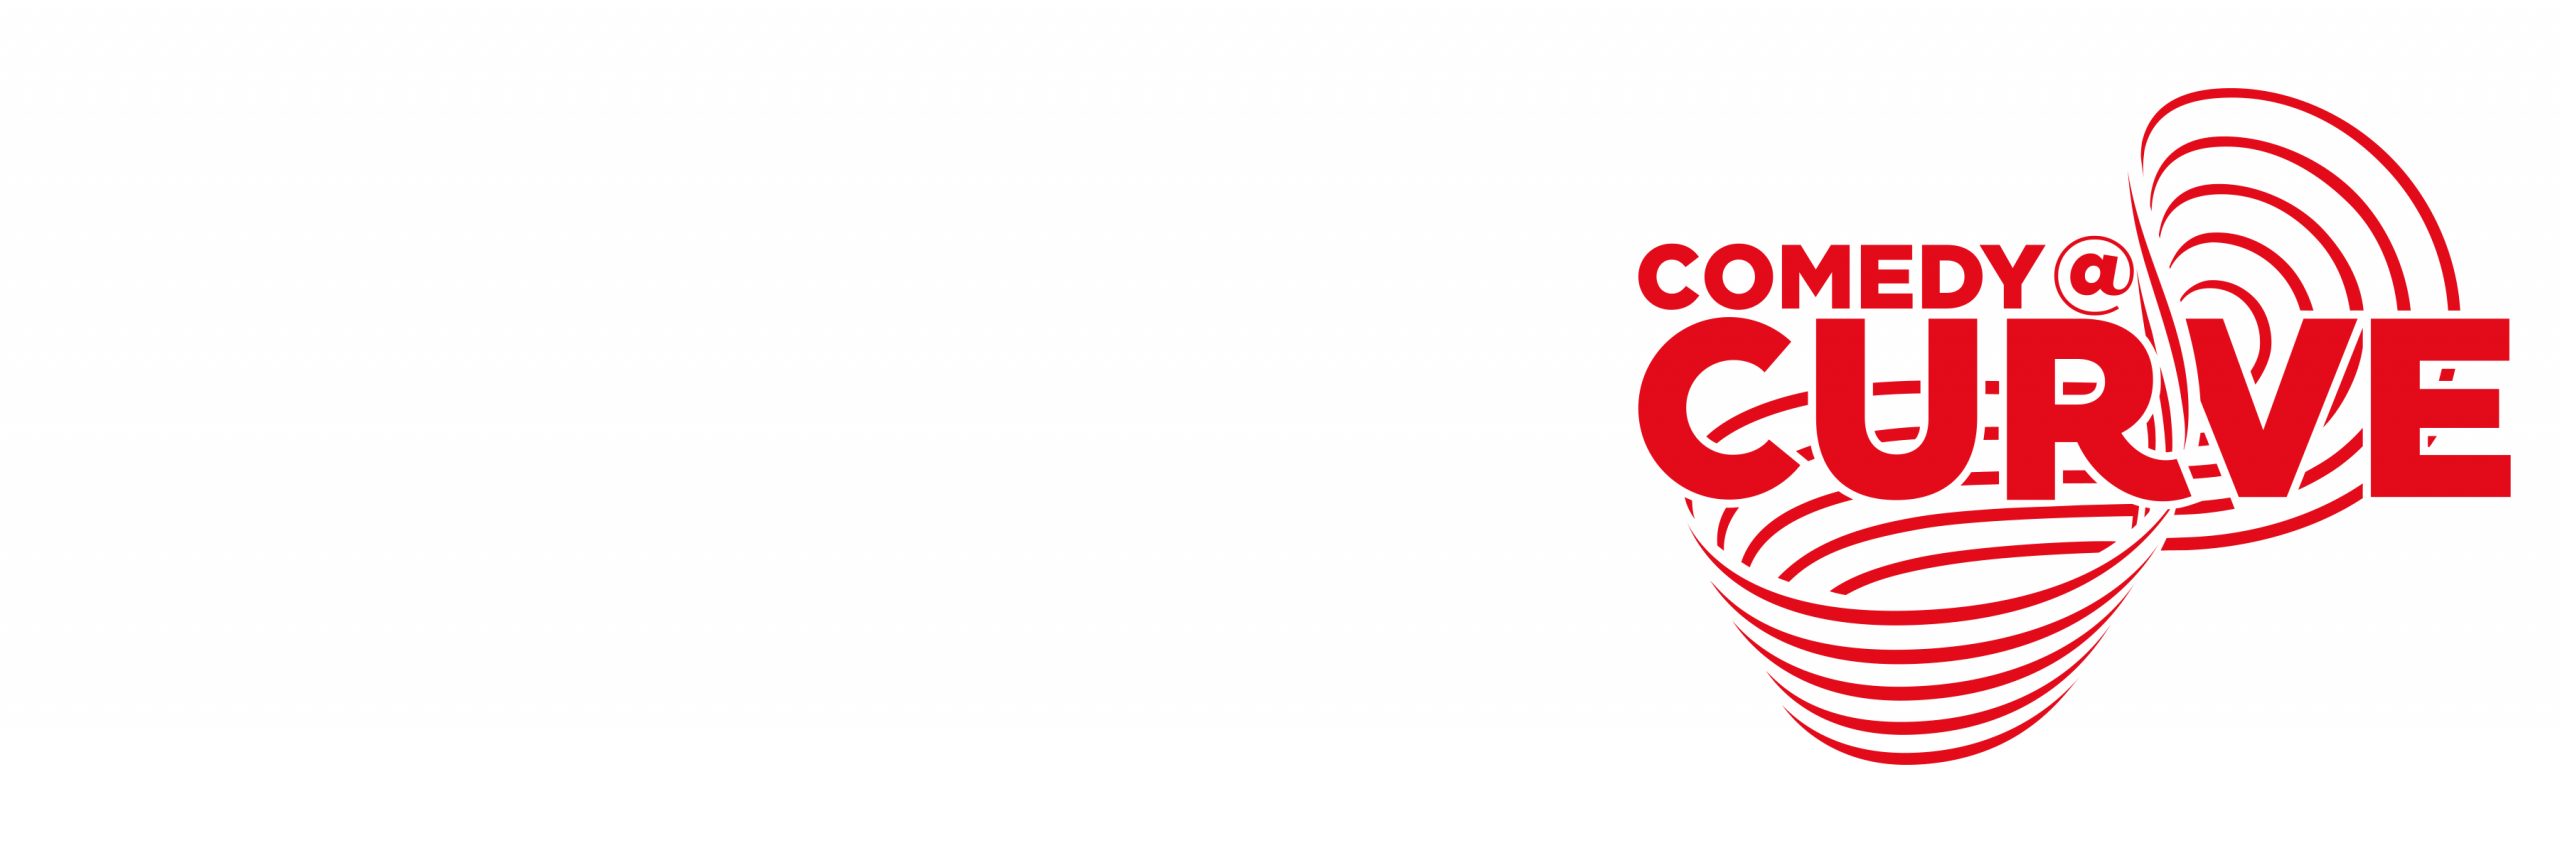 Red Comedy at Curve logo on a white background.